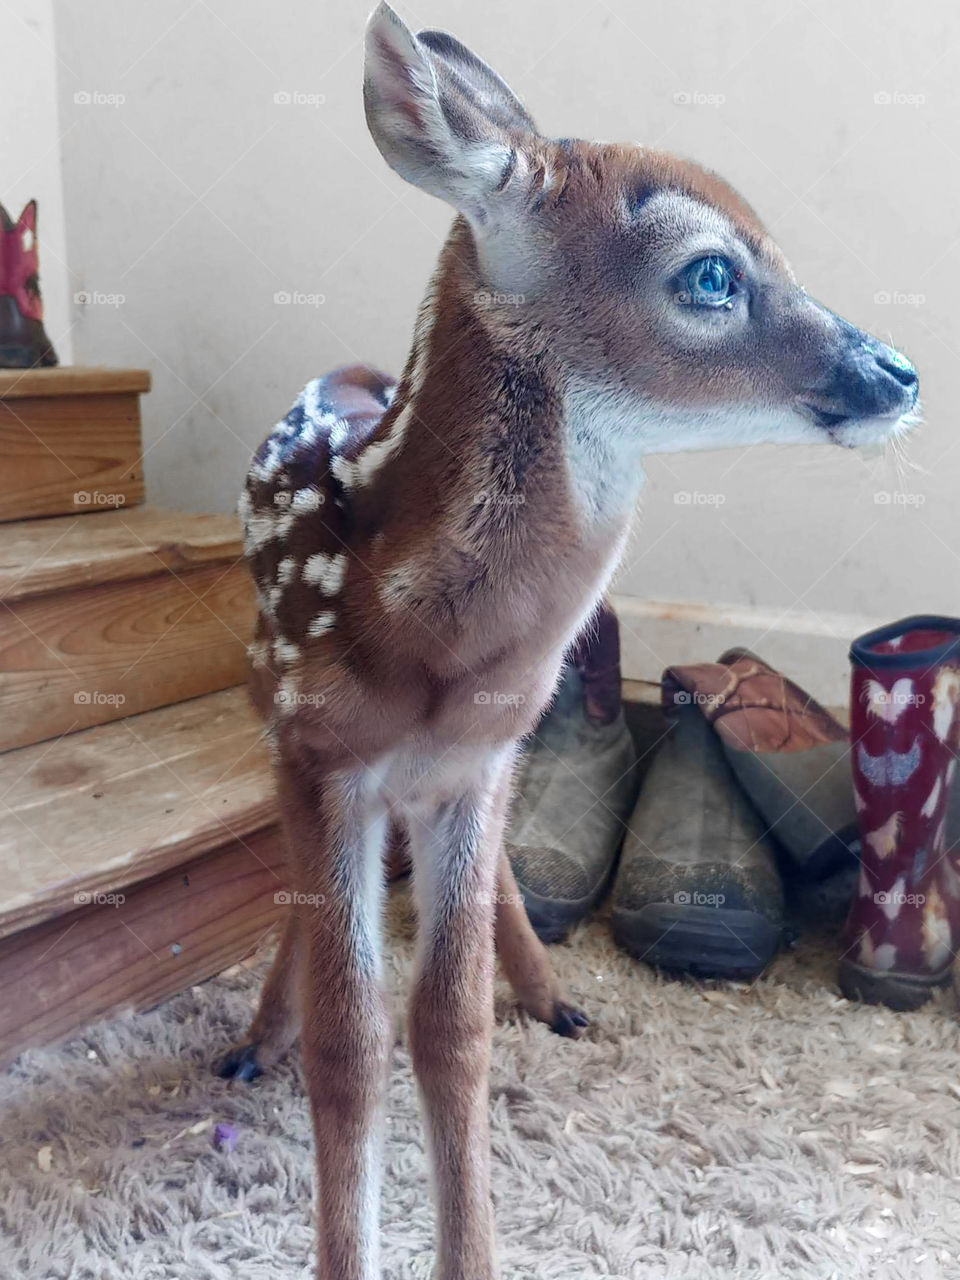 Abandoned fawn spends the weekend with us while waiting on a knowledgeable rescue. Beautiful Eyes on this deer